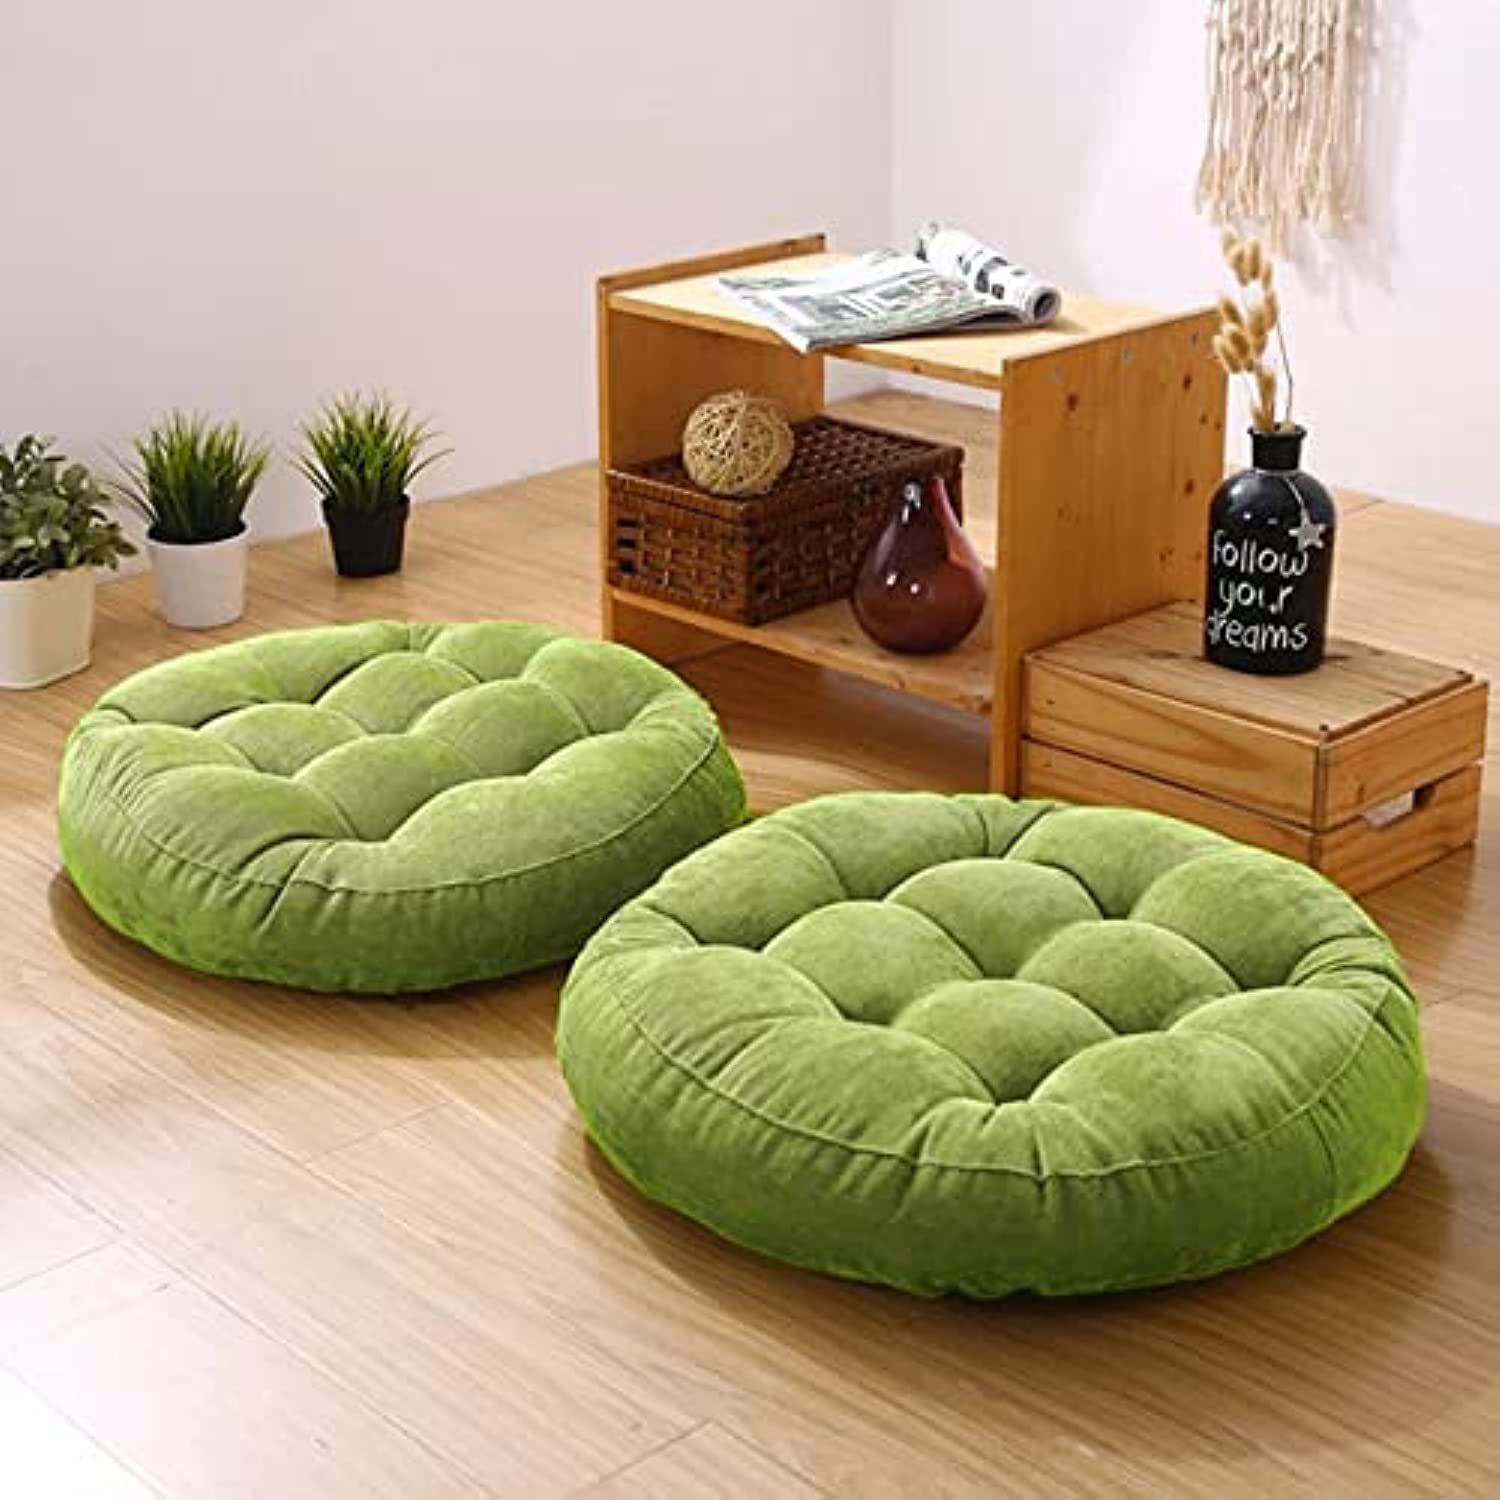 Wooden floor with two green cushions.